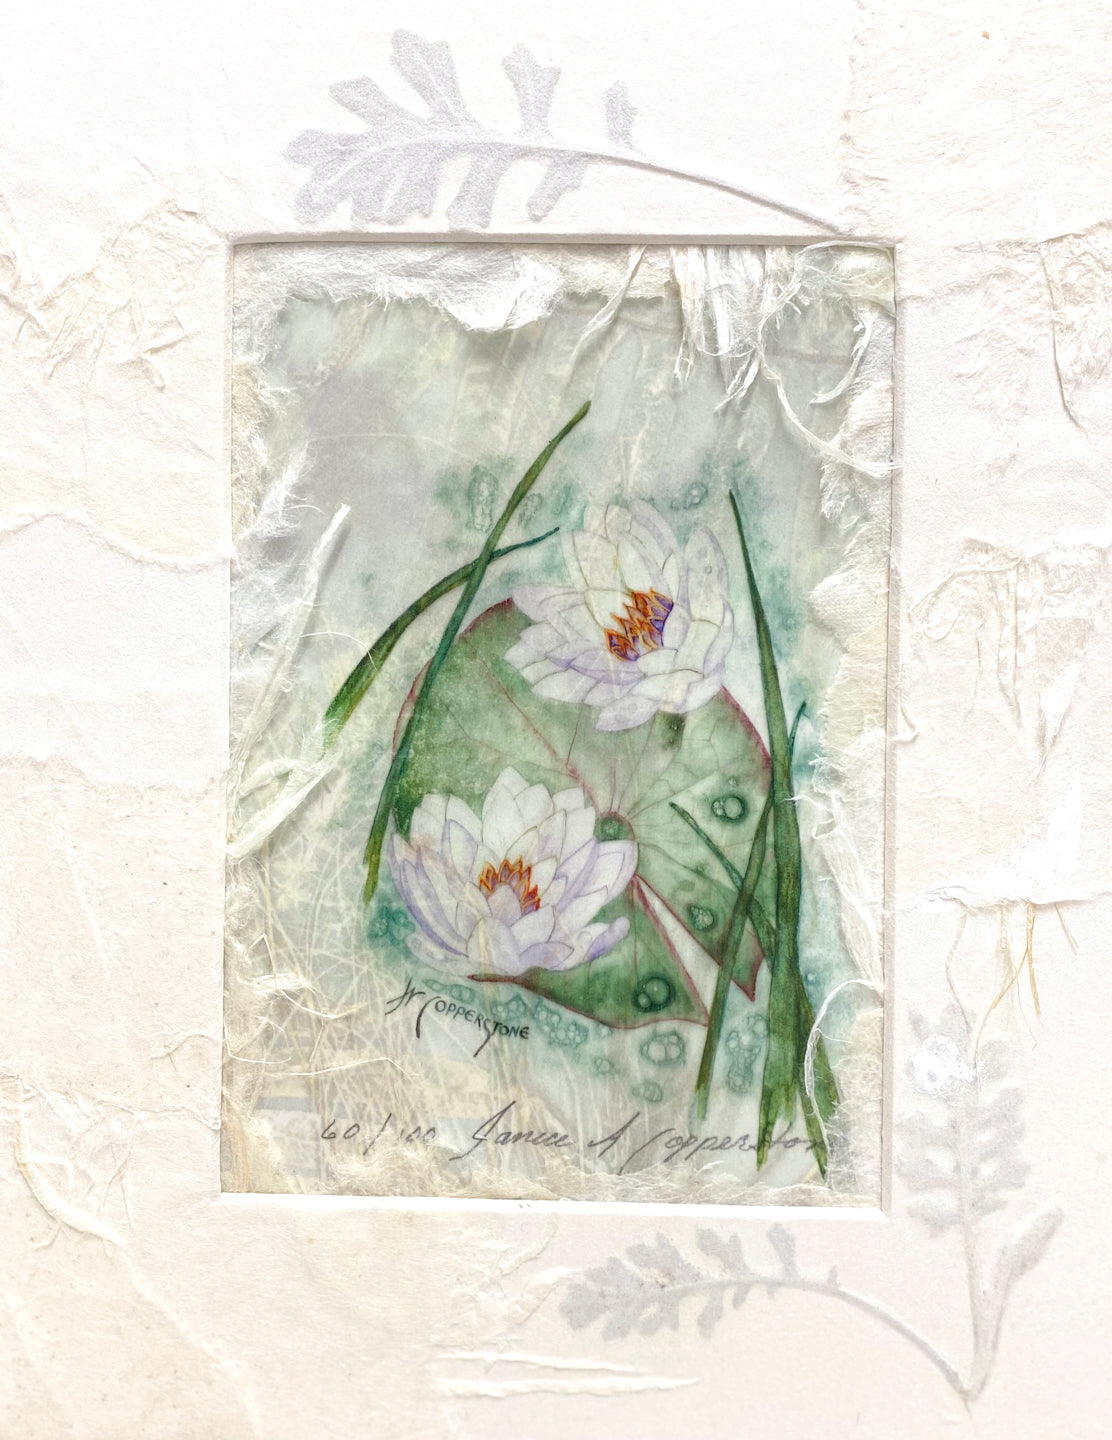 Waterlily - Mixed media fine art print by Janice A. Copperstone of Milford, Mich.  